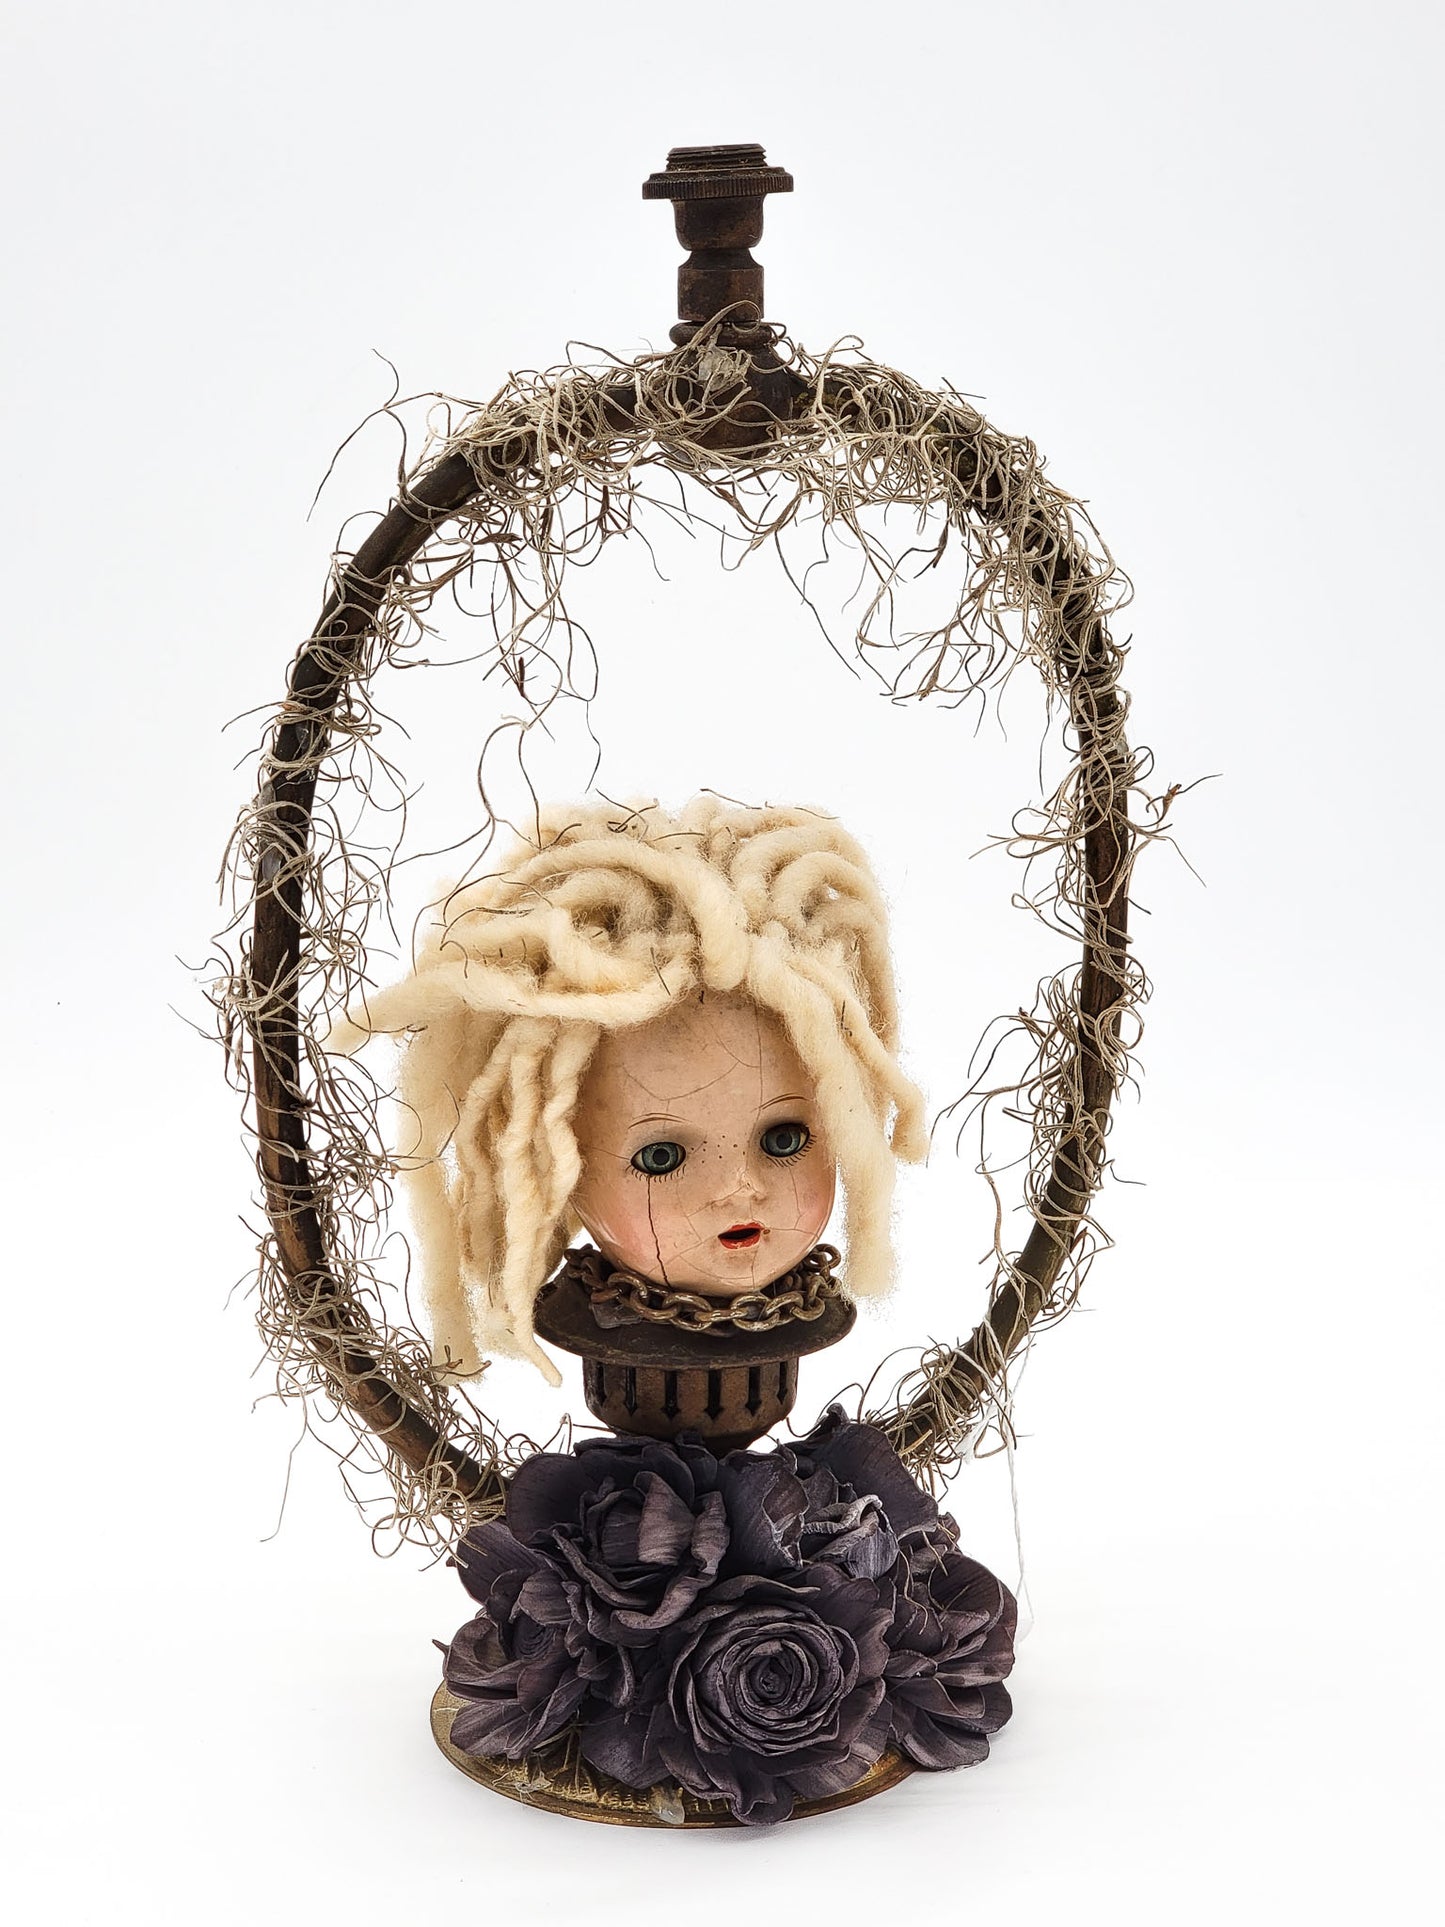 Baby Doll Assemblage Art